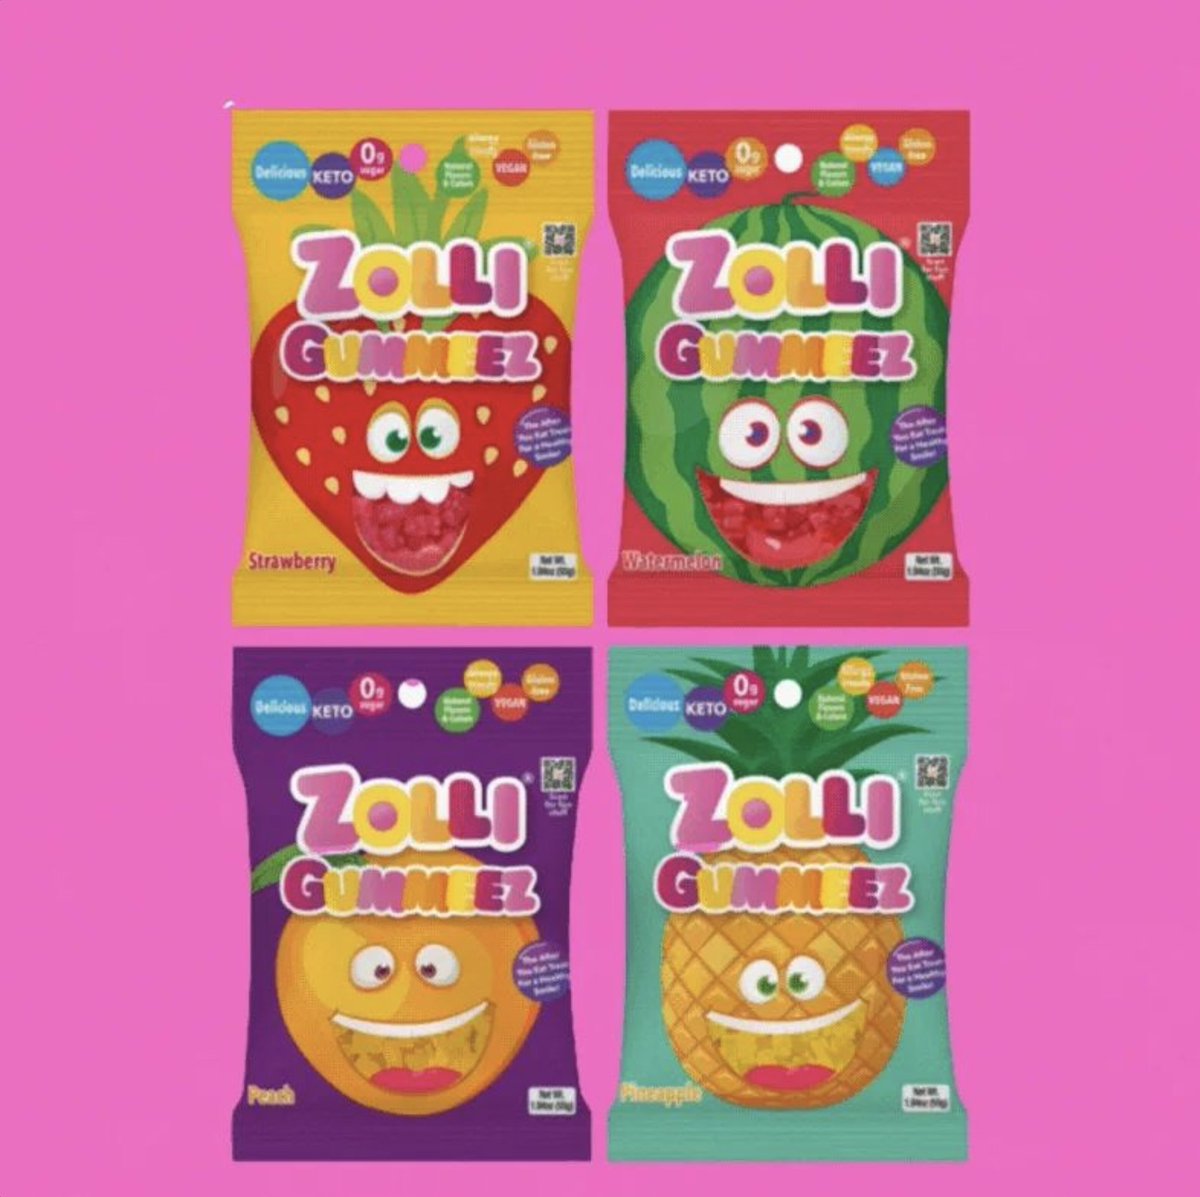 Apply to try FREE: bit.ly/3F9vSLY 🎉

Bursting with real flavors, @Zollipops sugar free Zolli Gummeez are the fruity, juicy & chewy gummy bears that will keep your whole family smiling! 😁

Can't wait? Use this coupon code for 15% Off: GOODIE15  bit.ly/43hzfve